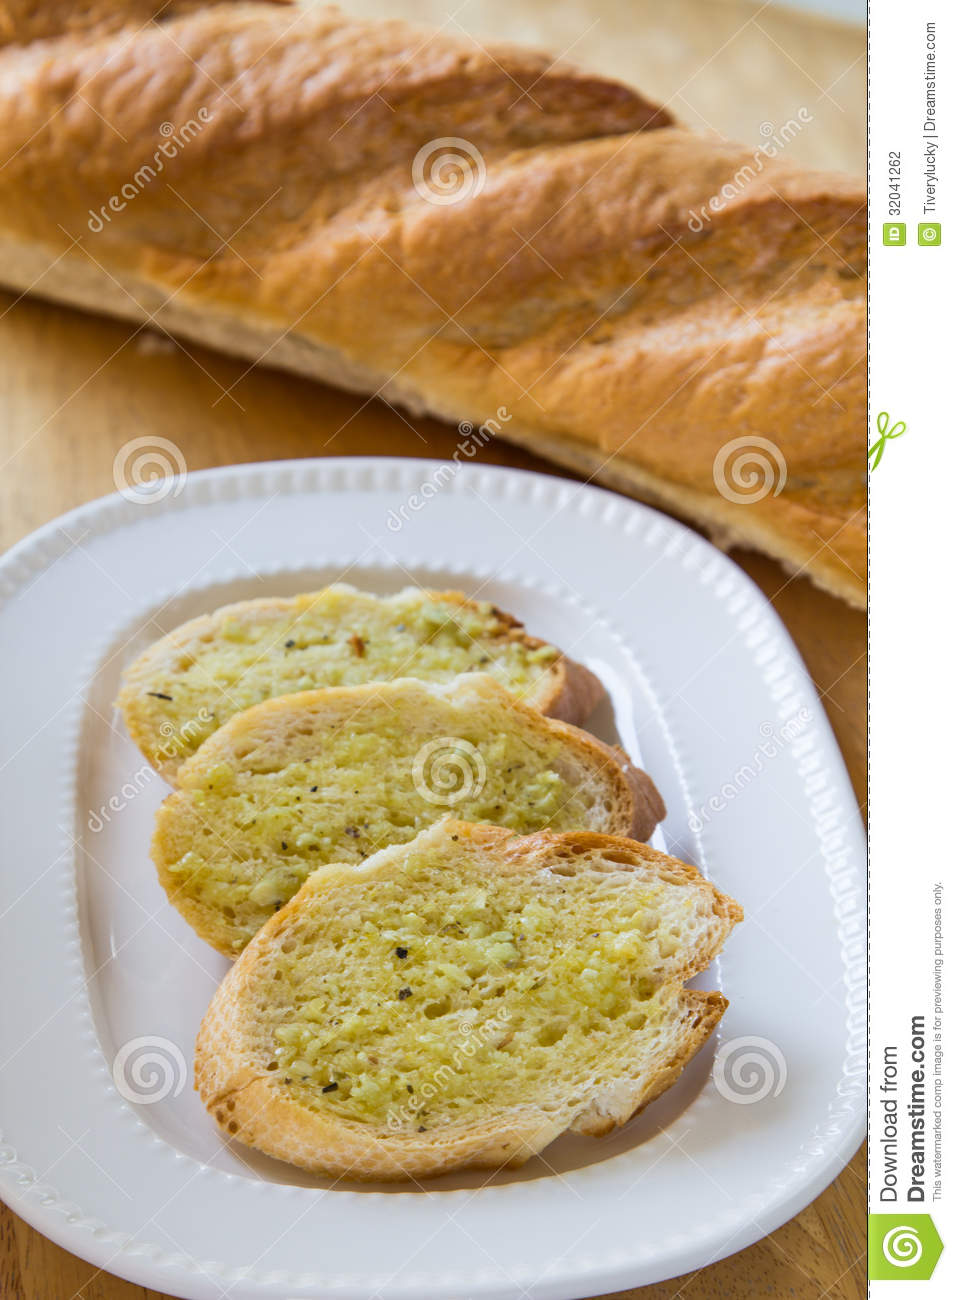 Garlic Bread With Herbs On White Bread Dish